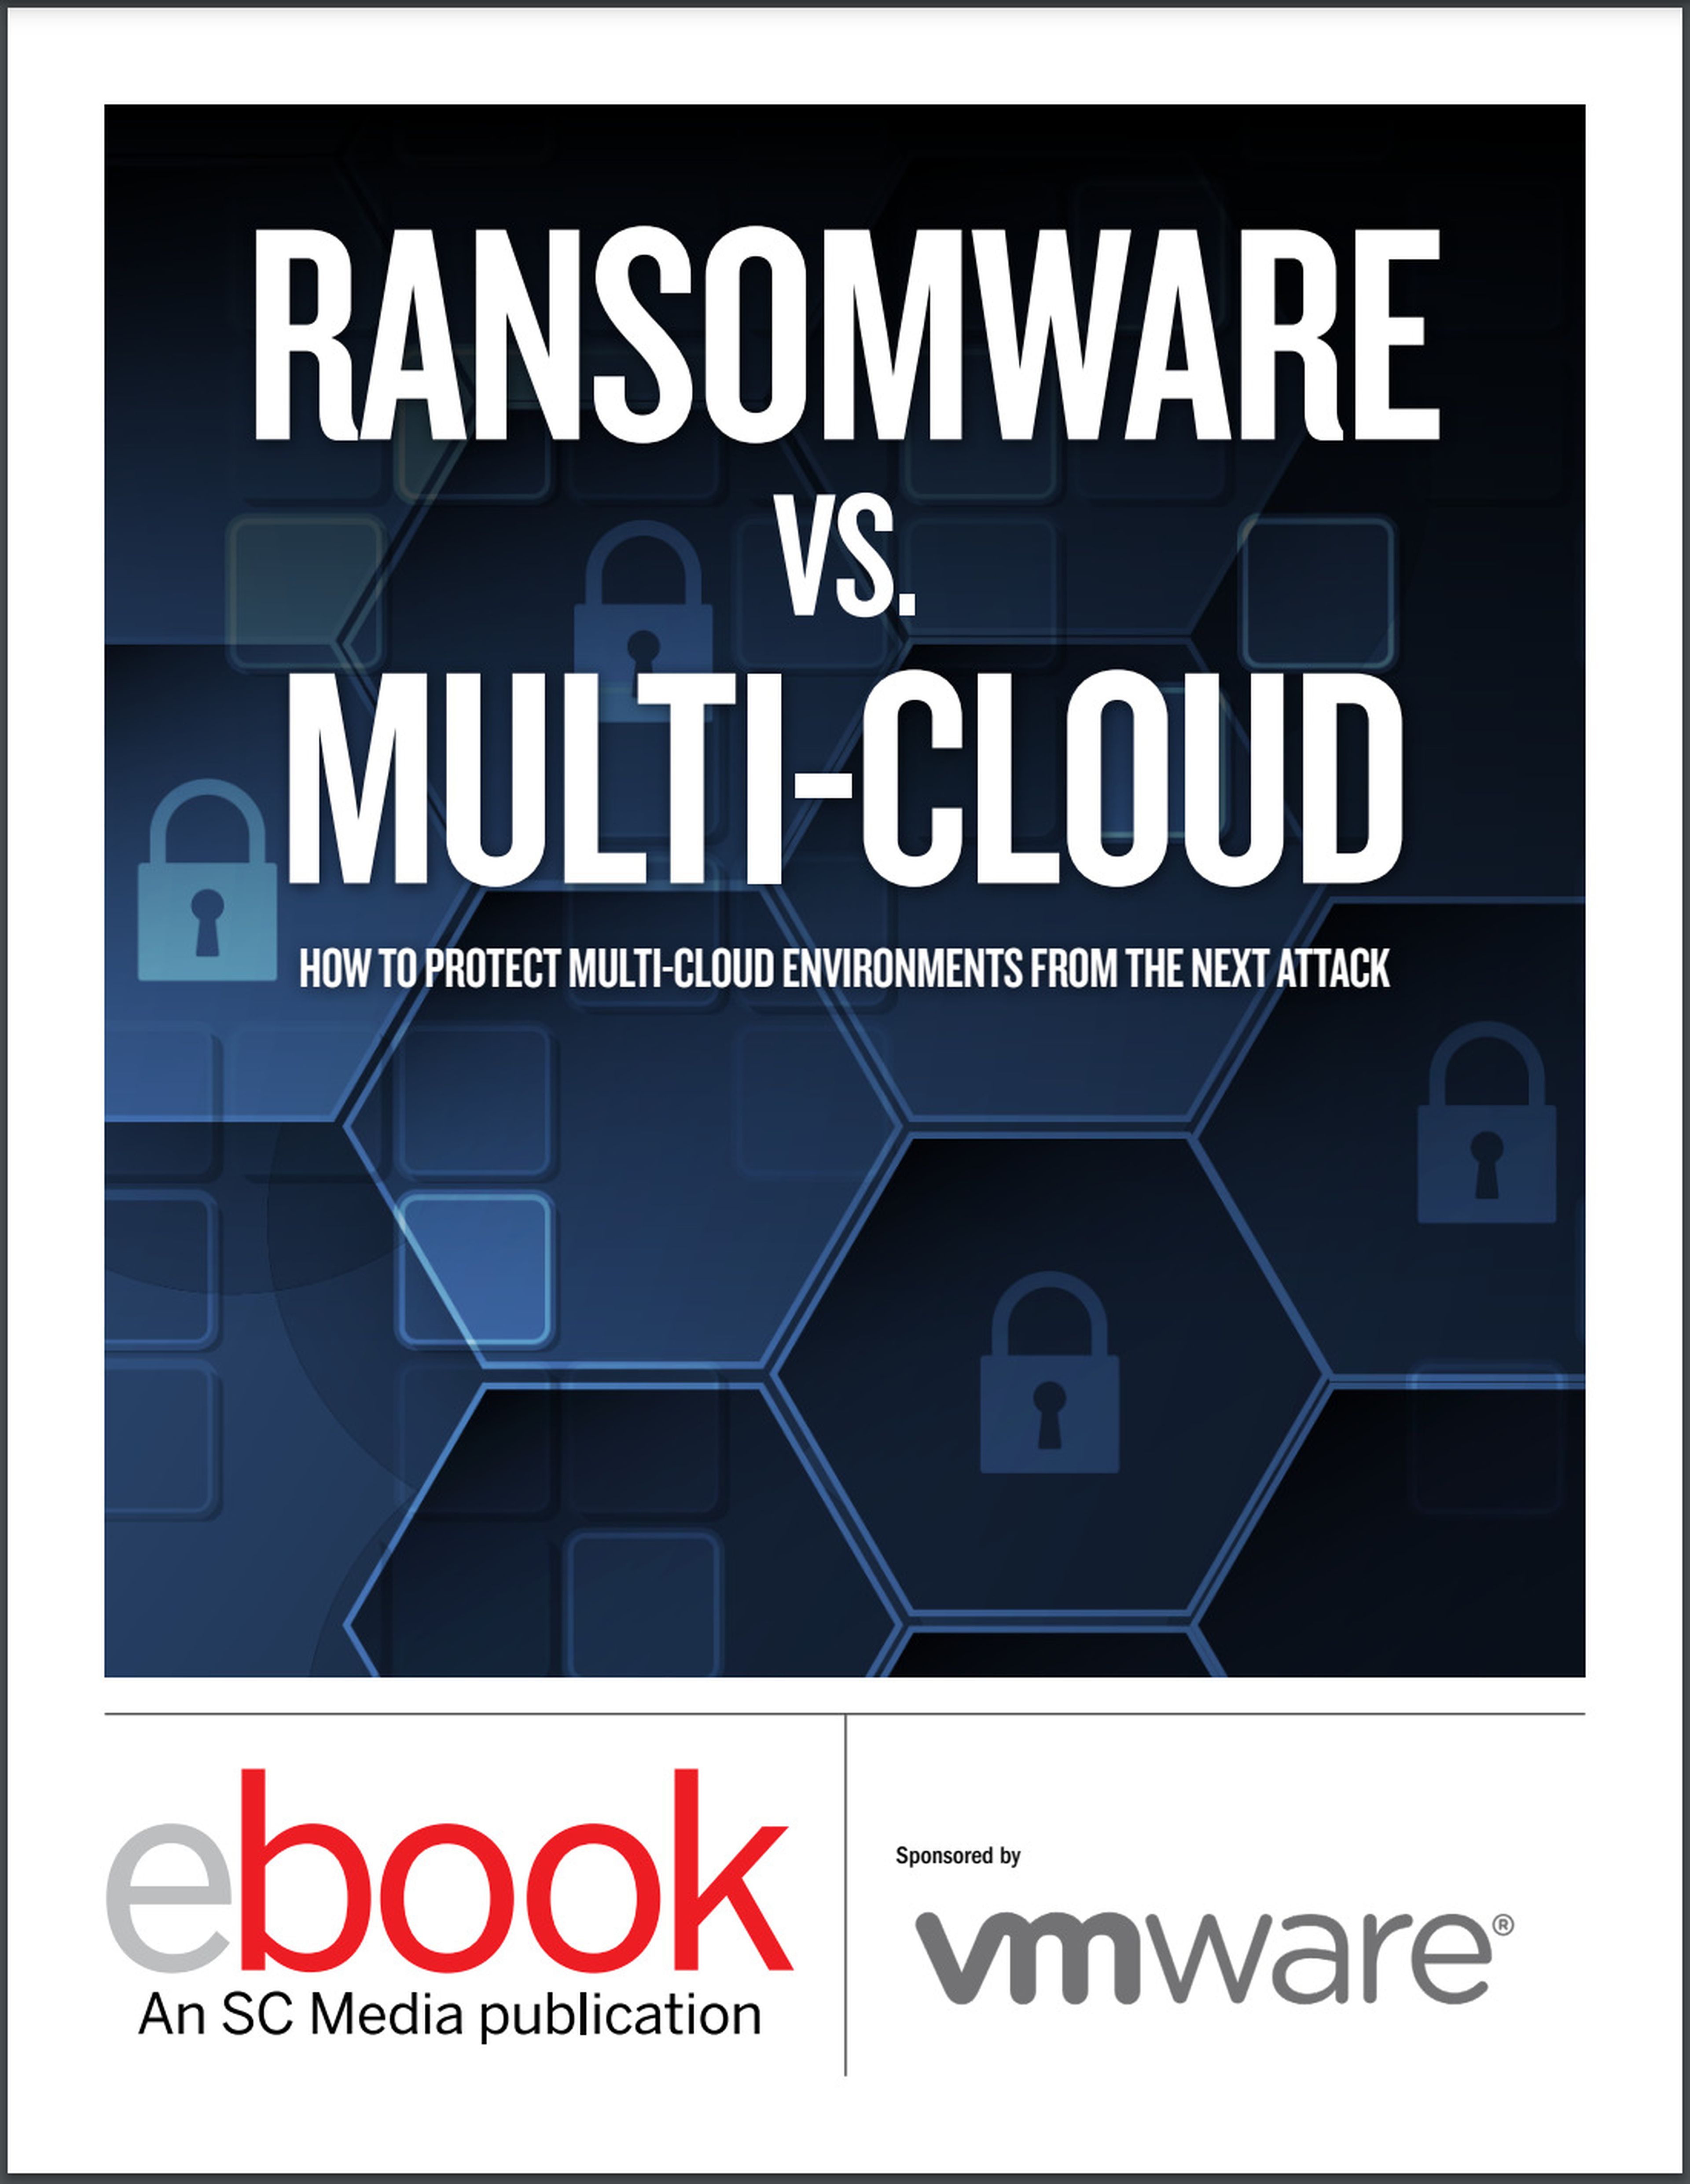 Ransomware vs. Multi-cloud: How to protect multi-cloud environments from the next attack